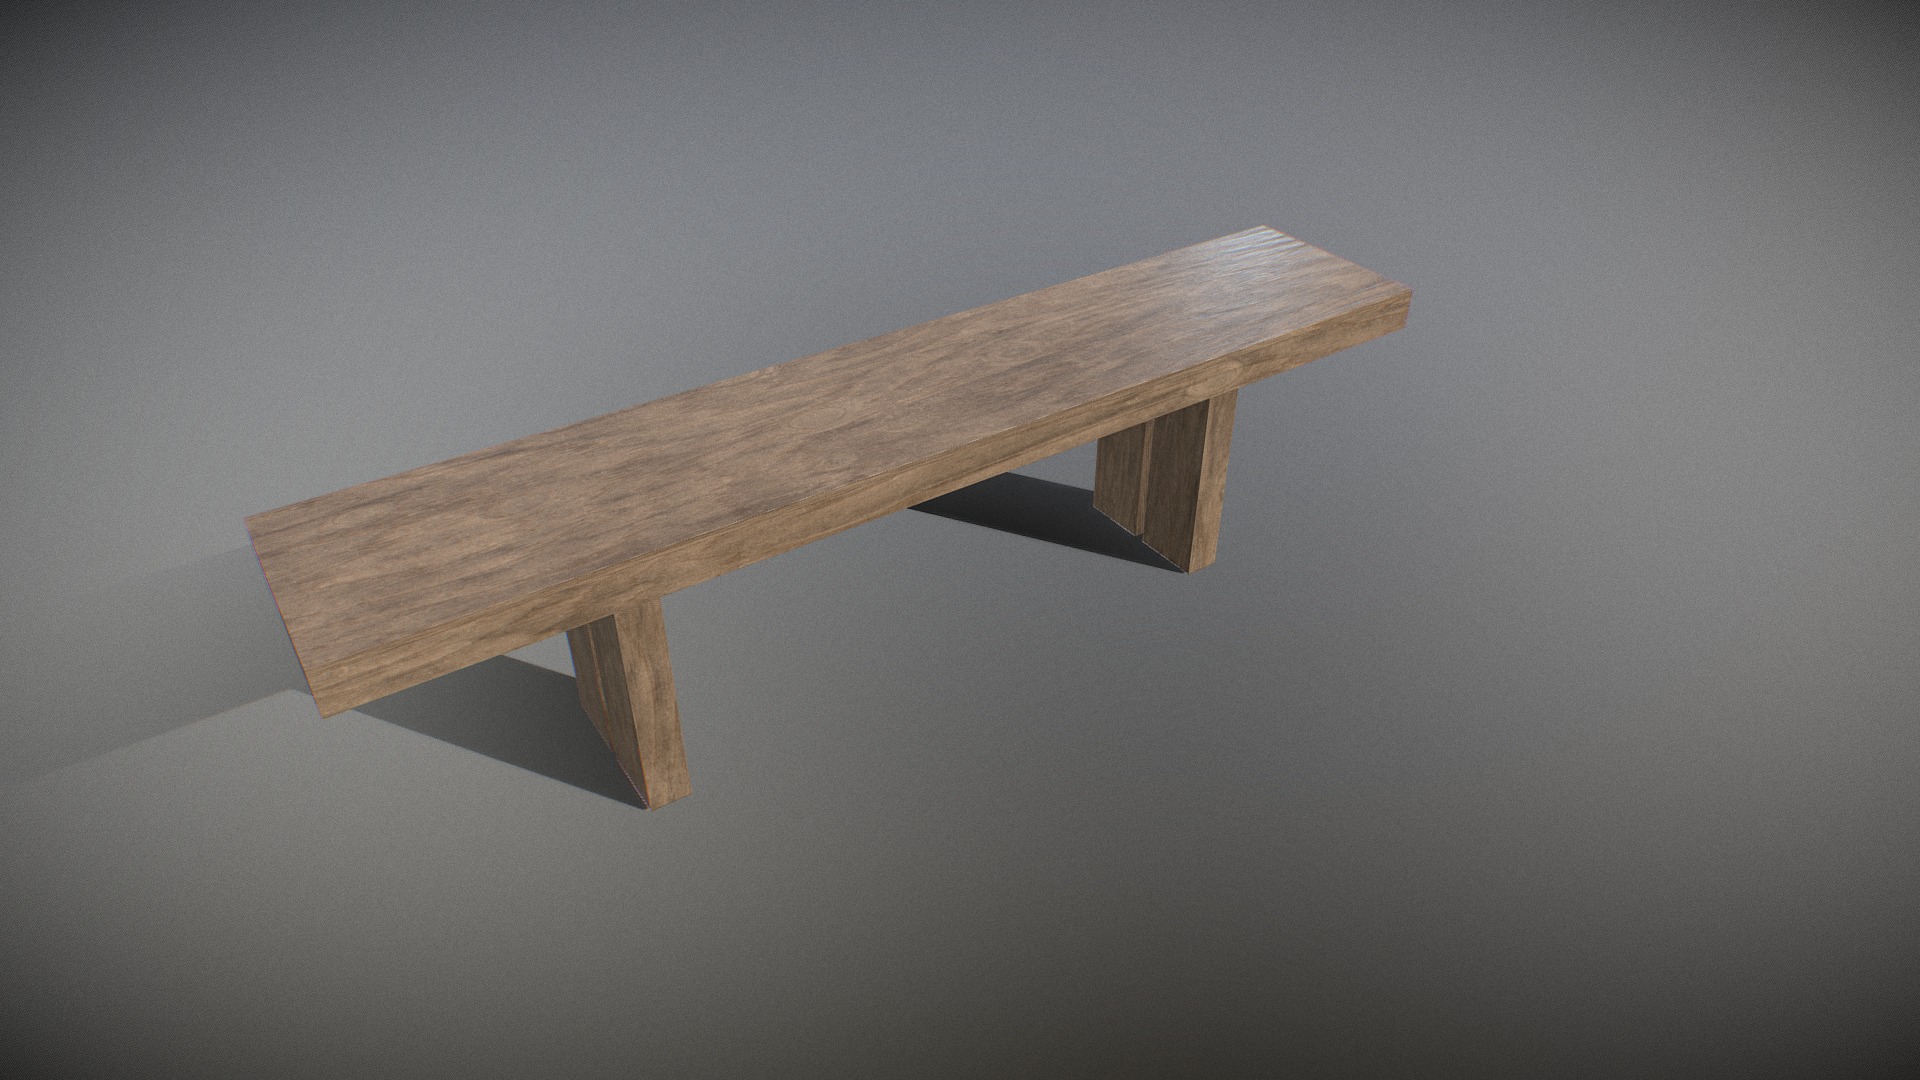 3D model Bench wooden 02 - This is a 3D model of the Bench wooden 02. The 3D model is about a wooden table on a white background.